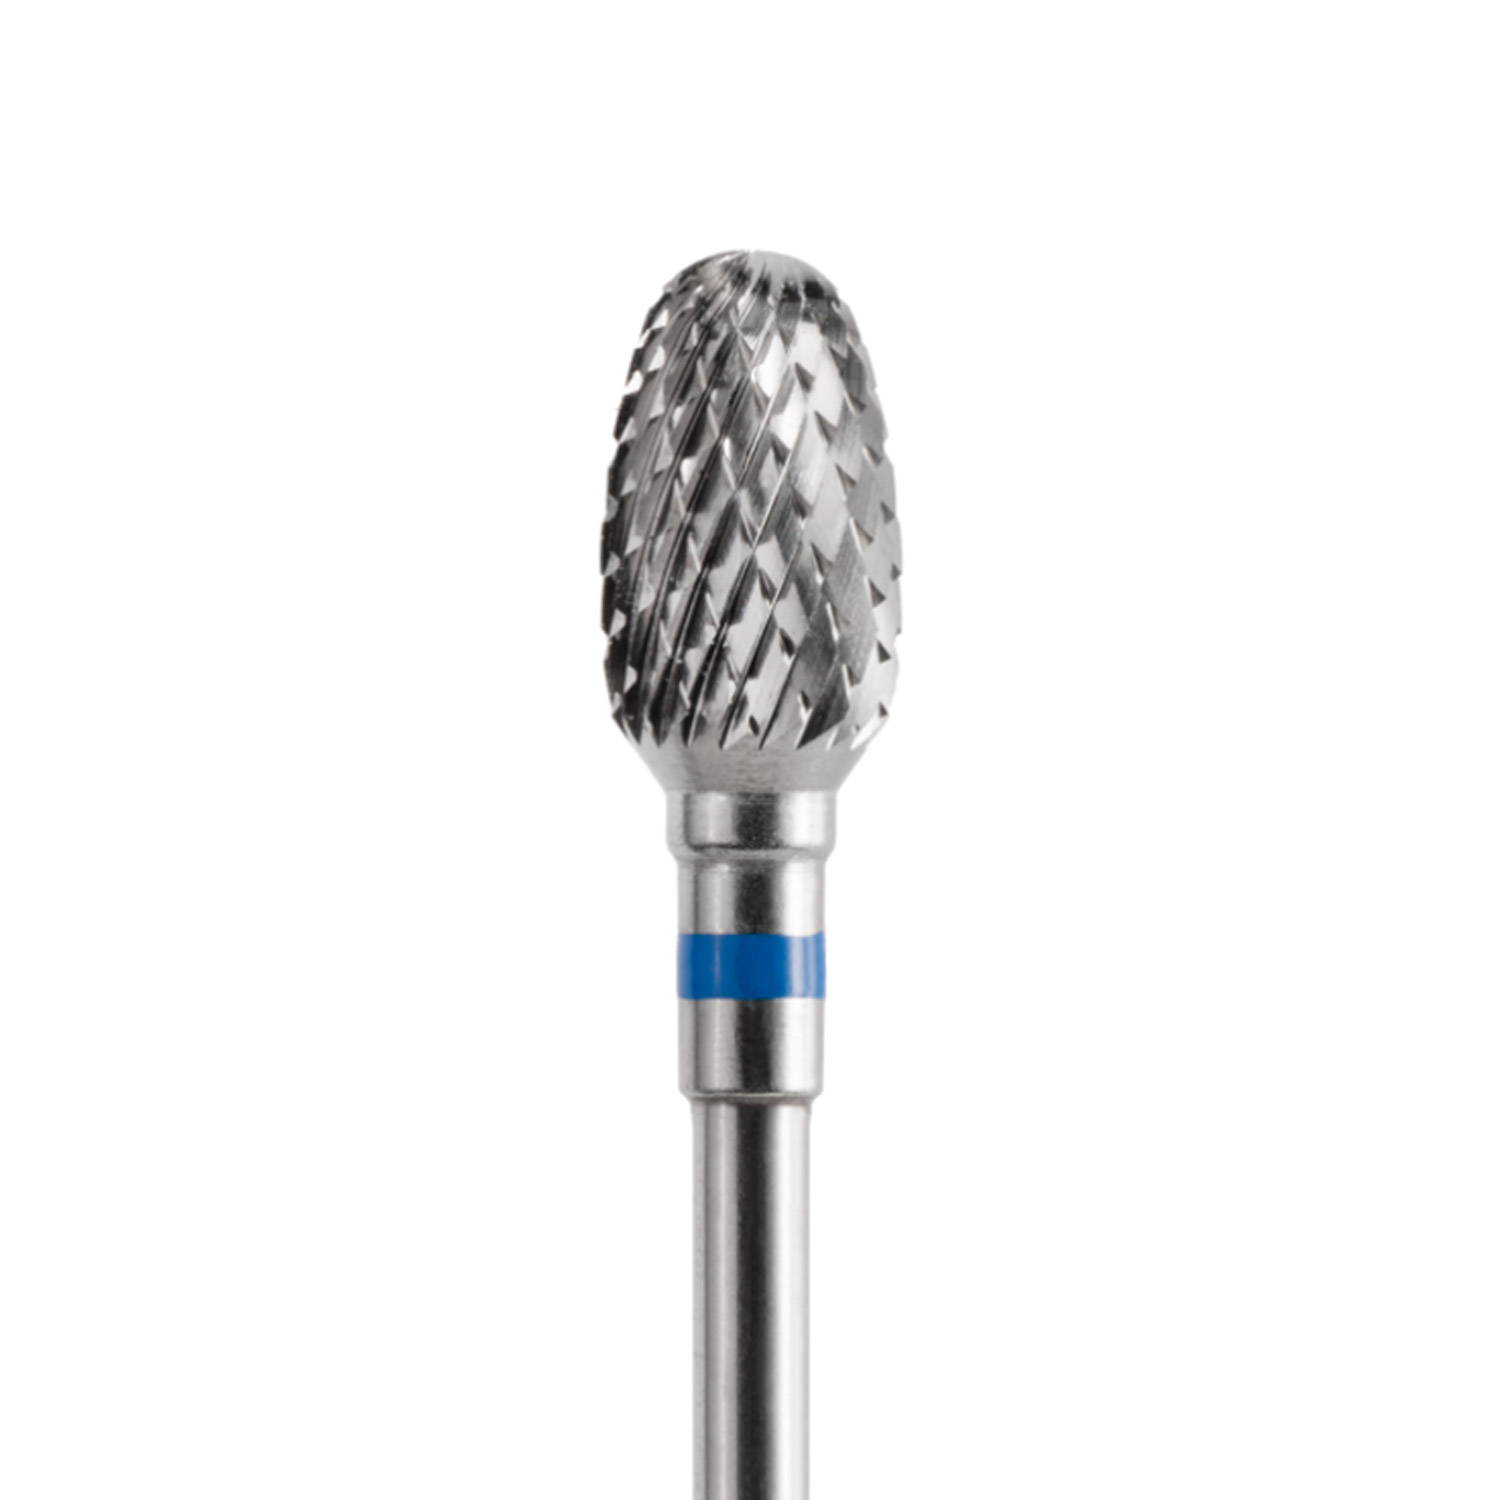 Acurata professional milling tool with moderate cross cut AC-74 ACURATA - 190 Series - Gel Removal